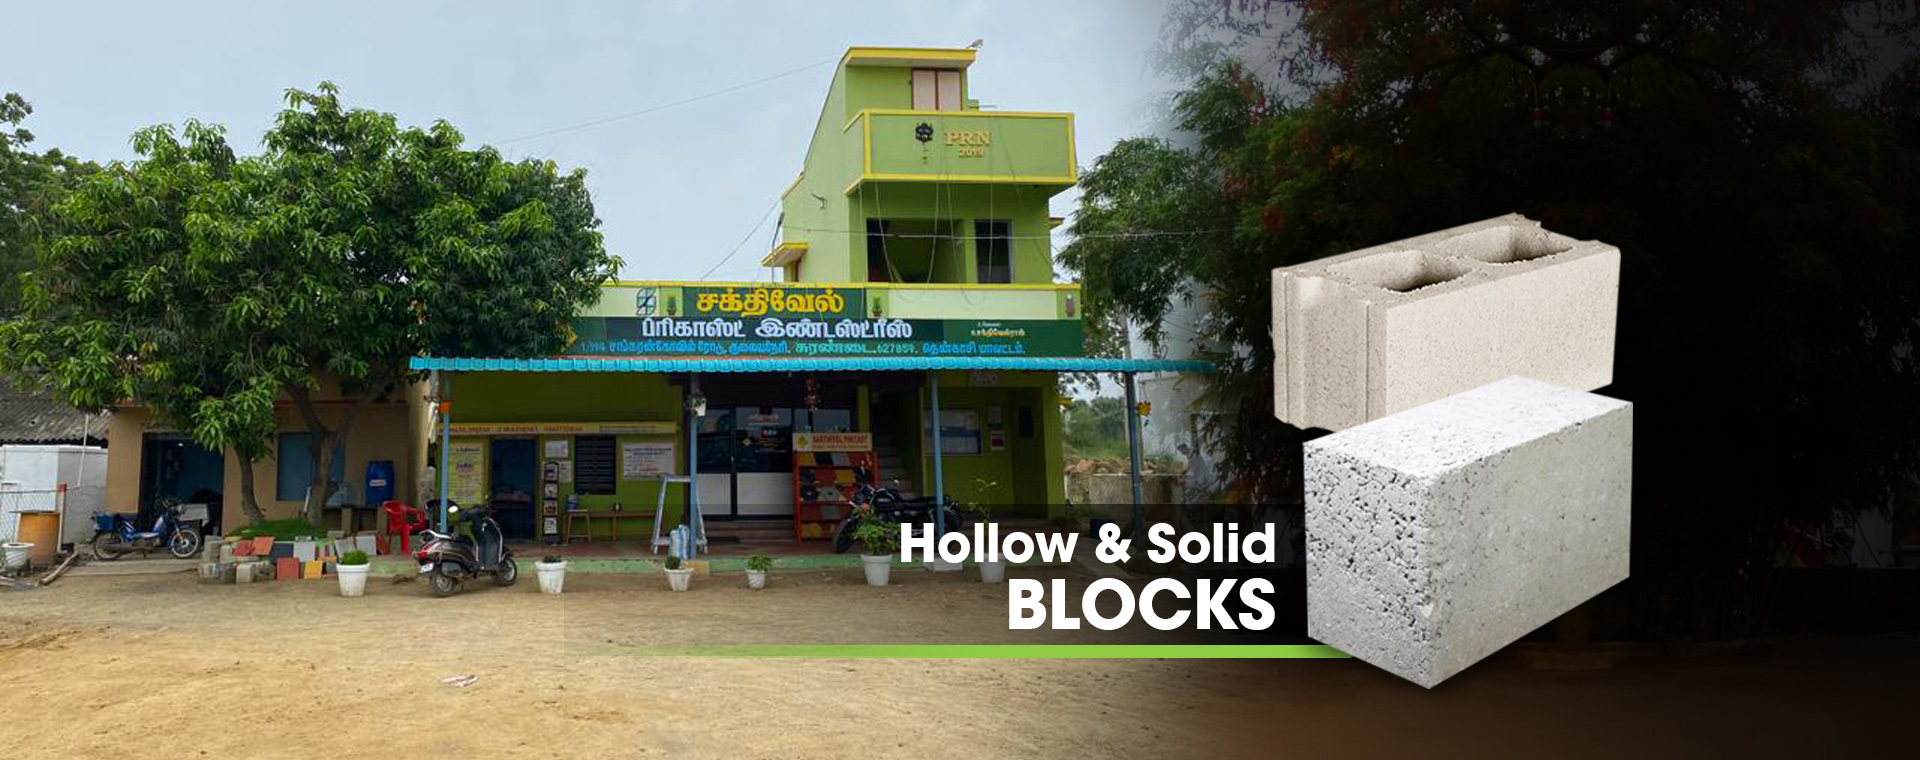 Hollow Blocks and Solid Blocks Manufacturers,Suppliers and Dealers